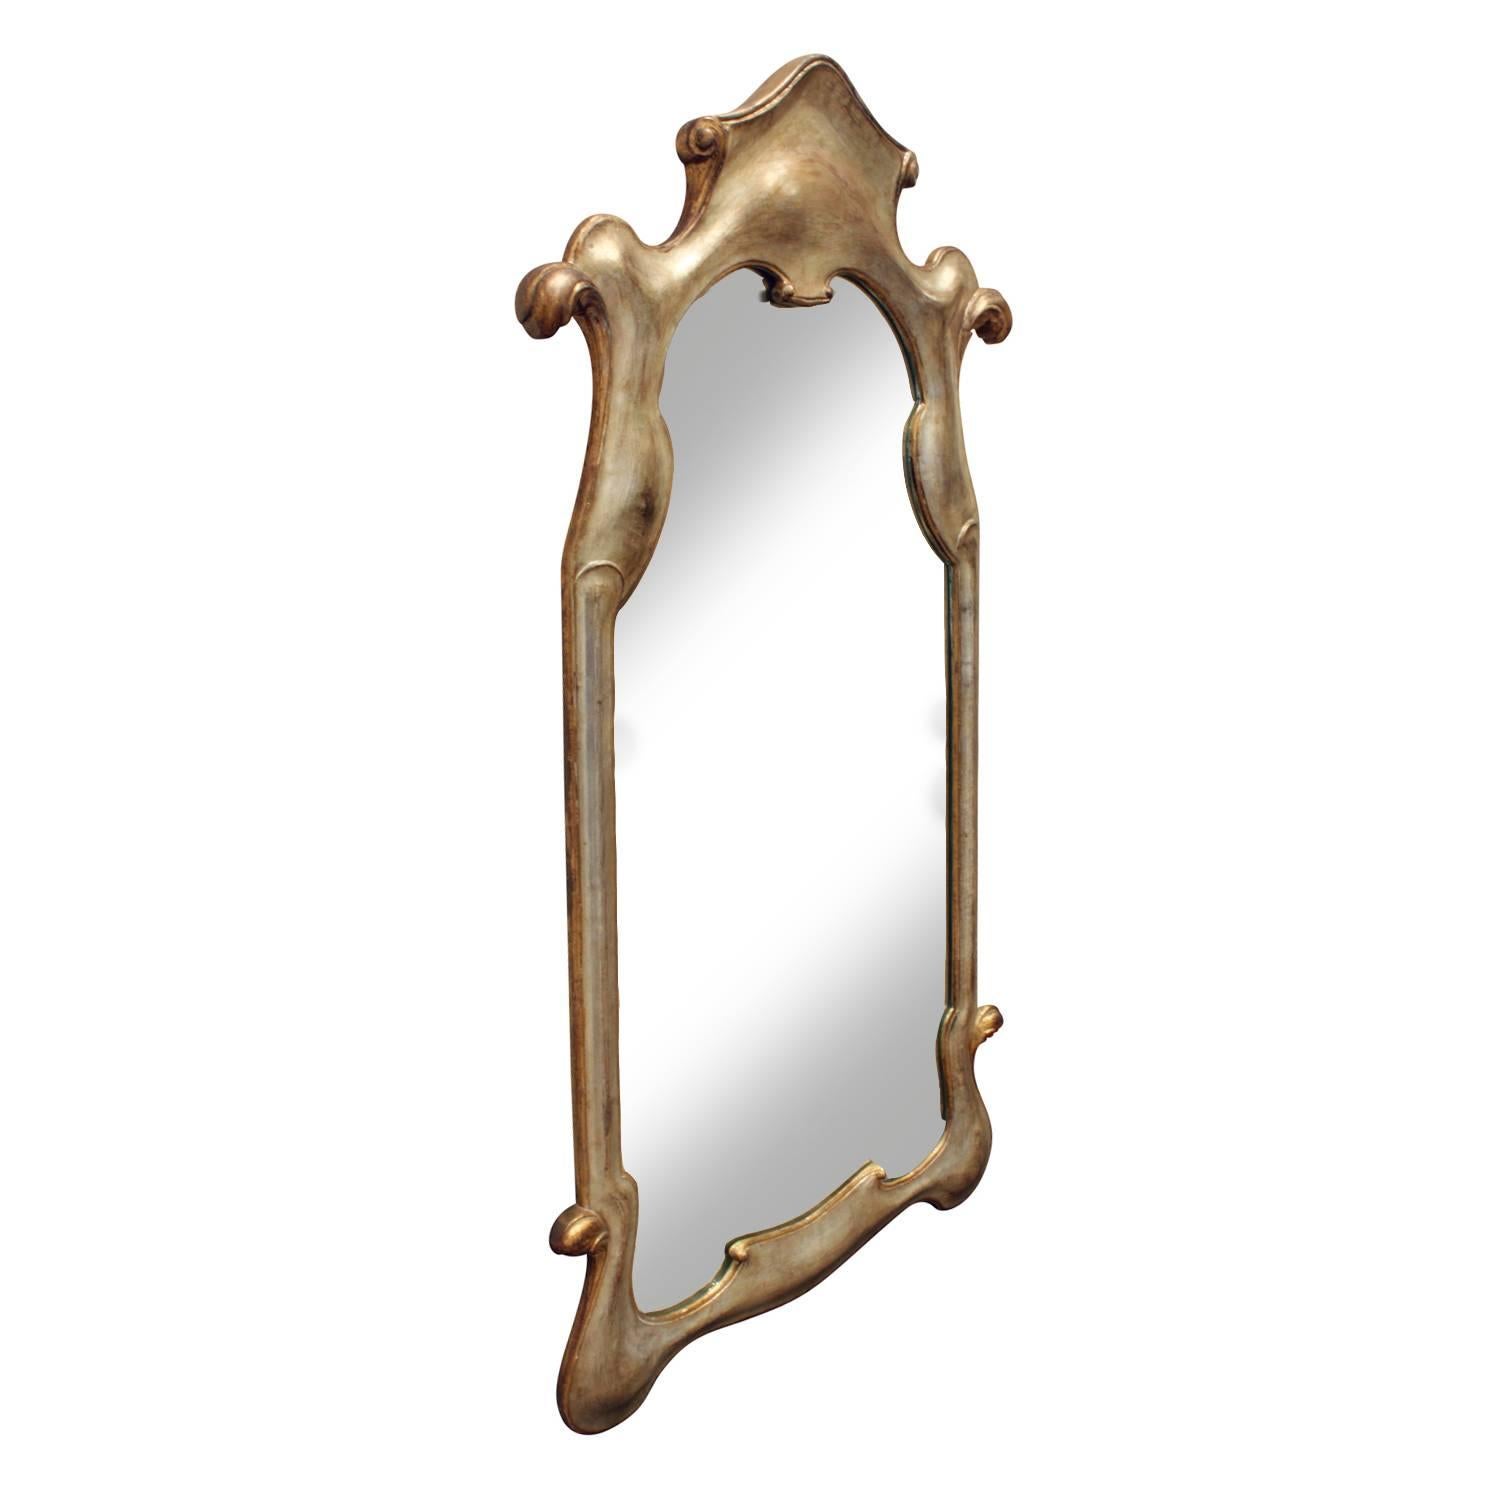 Wall hanging mirror in plaster with pale gold lacquer finish, Italian, 1940s. The form and coloration of this mirror are really beautiful.